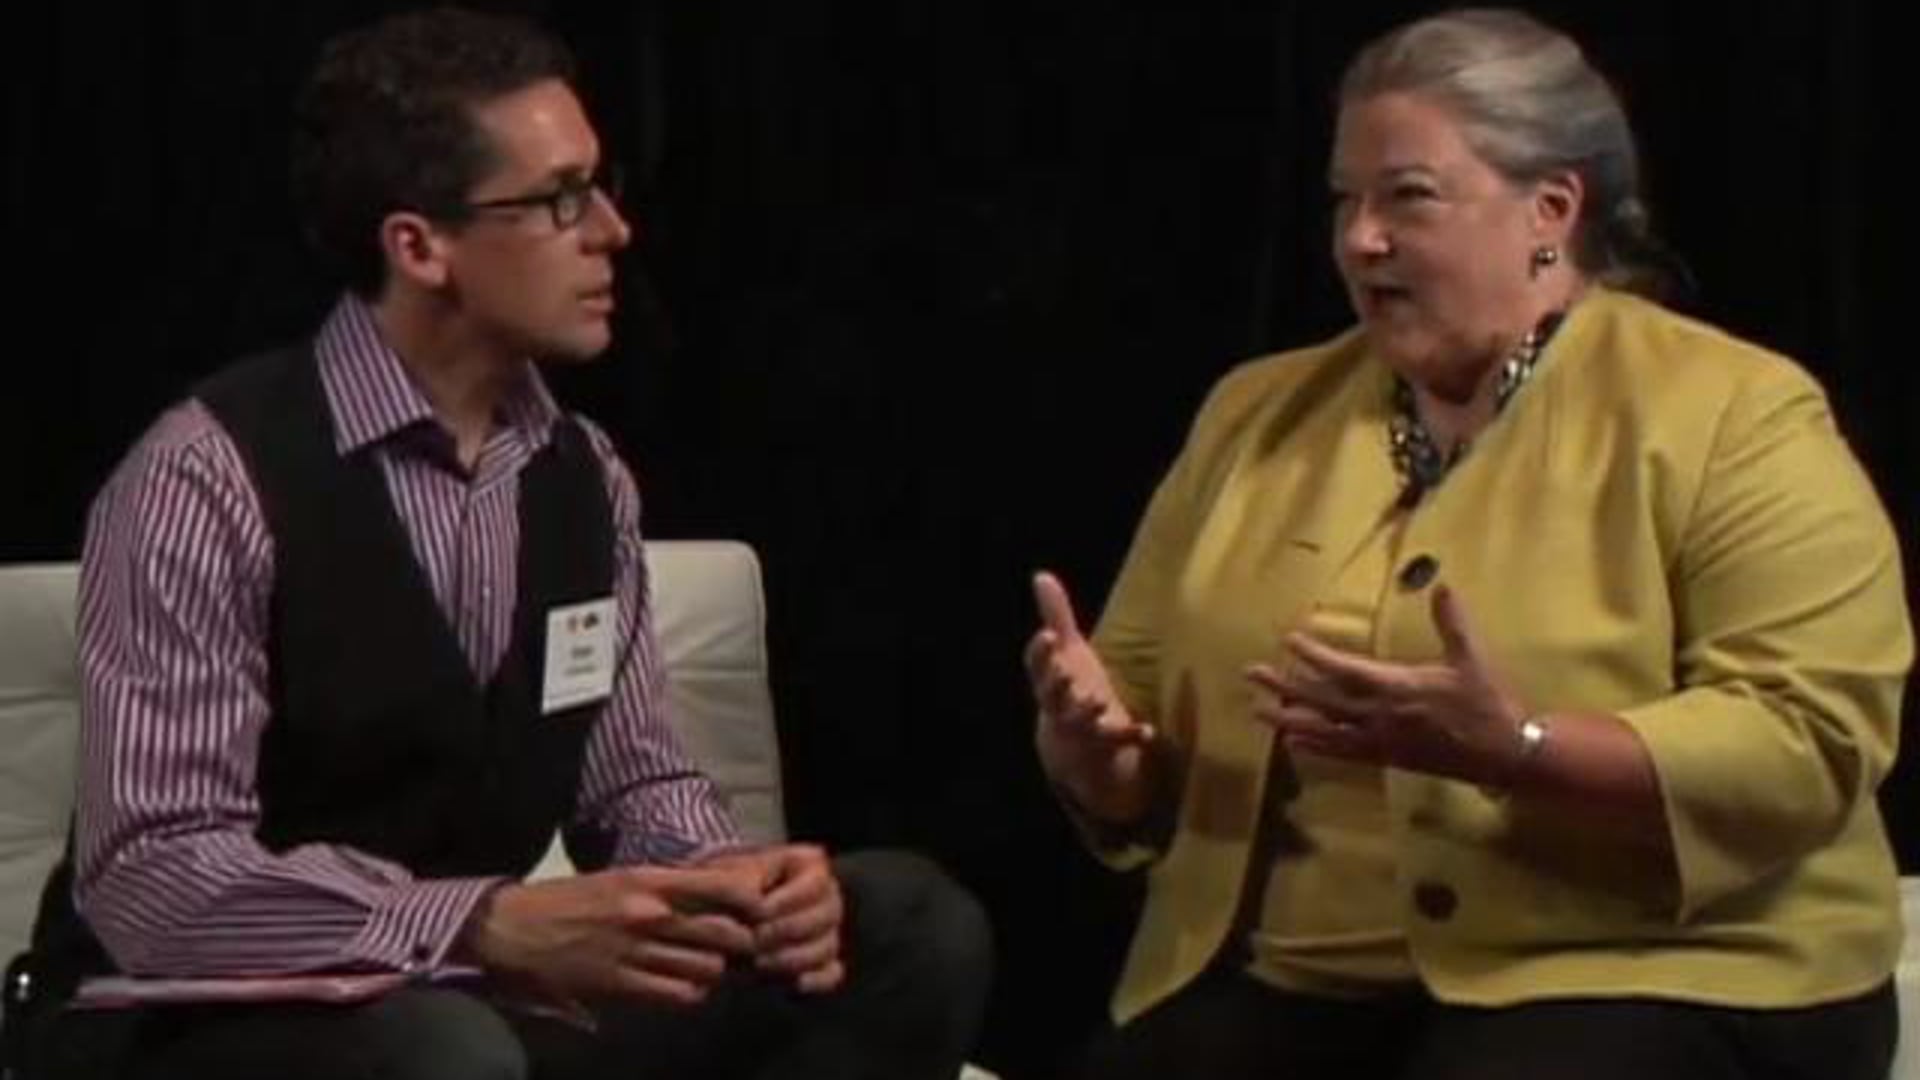 Peg Chemberlin of the MN Council of Churches Interviewed By Sean Kershaw at the National Civic Summit